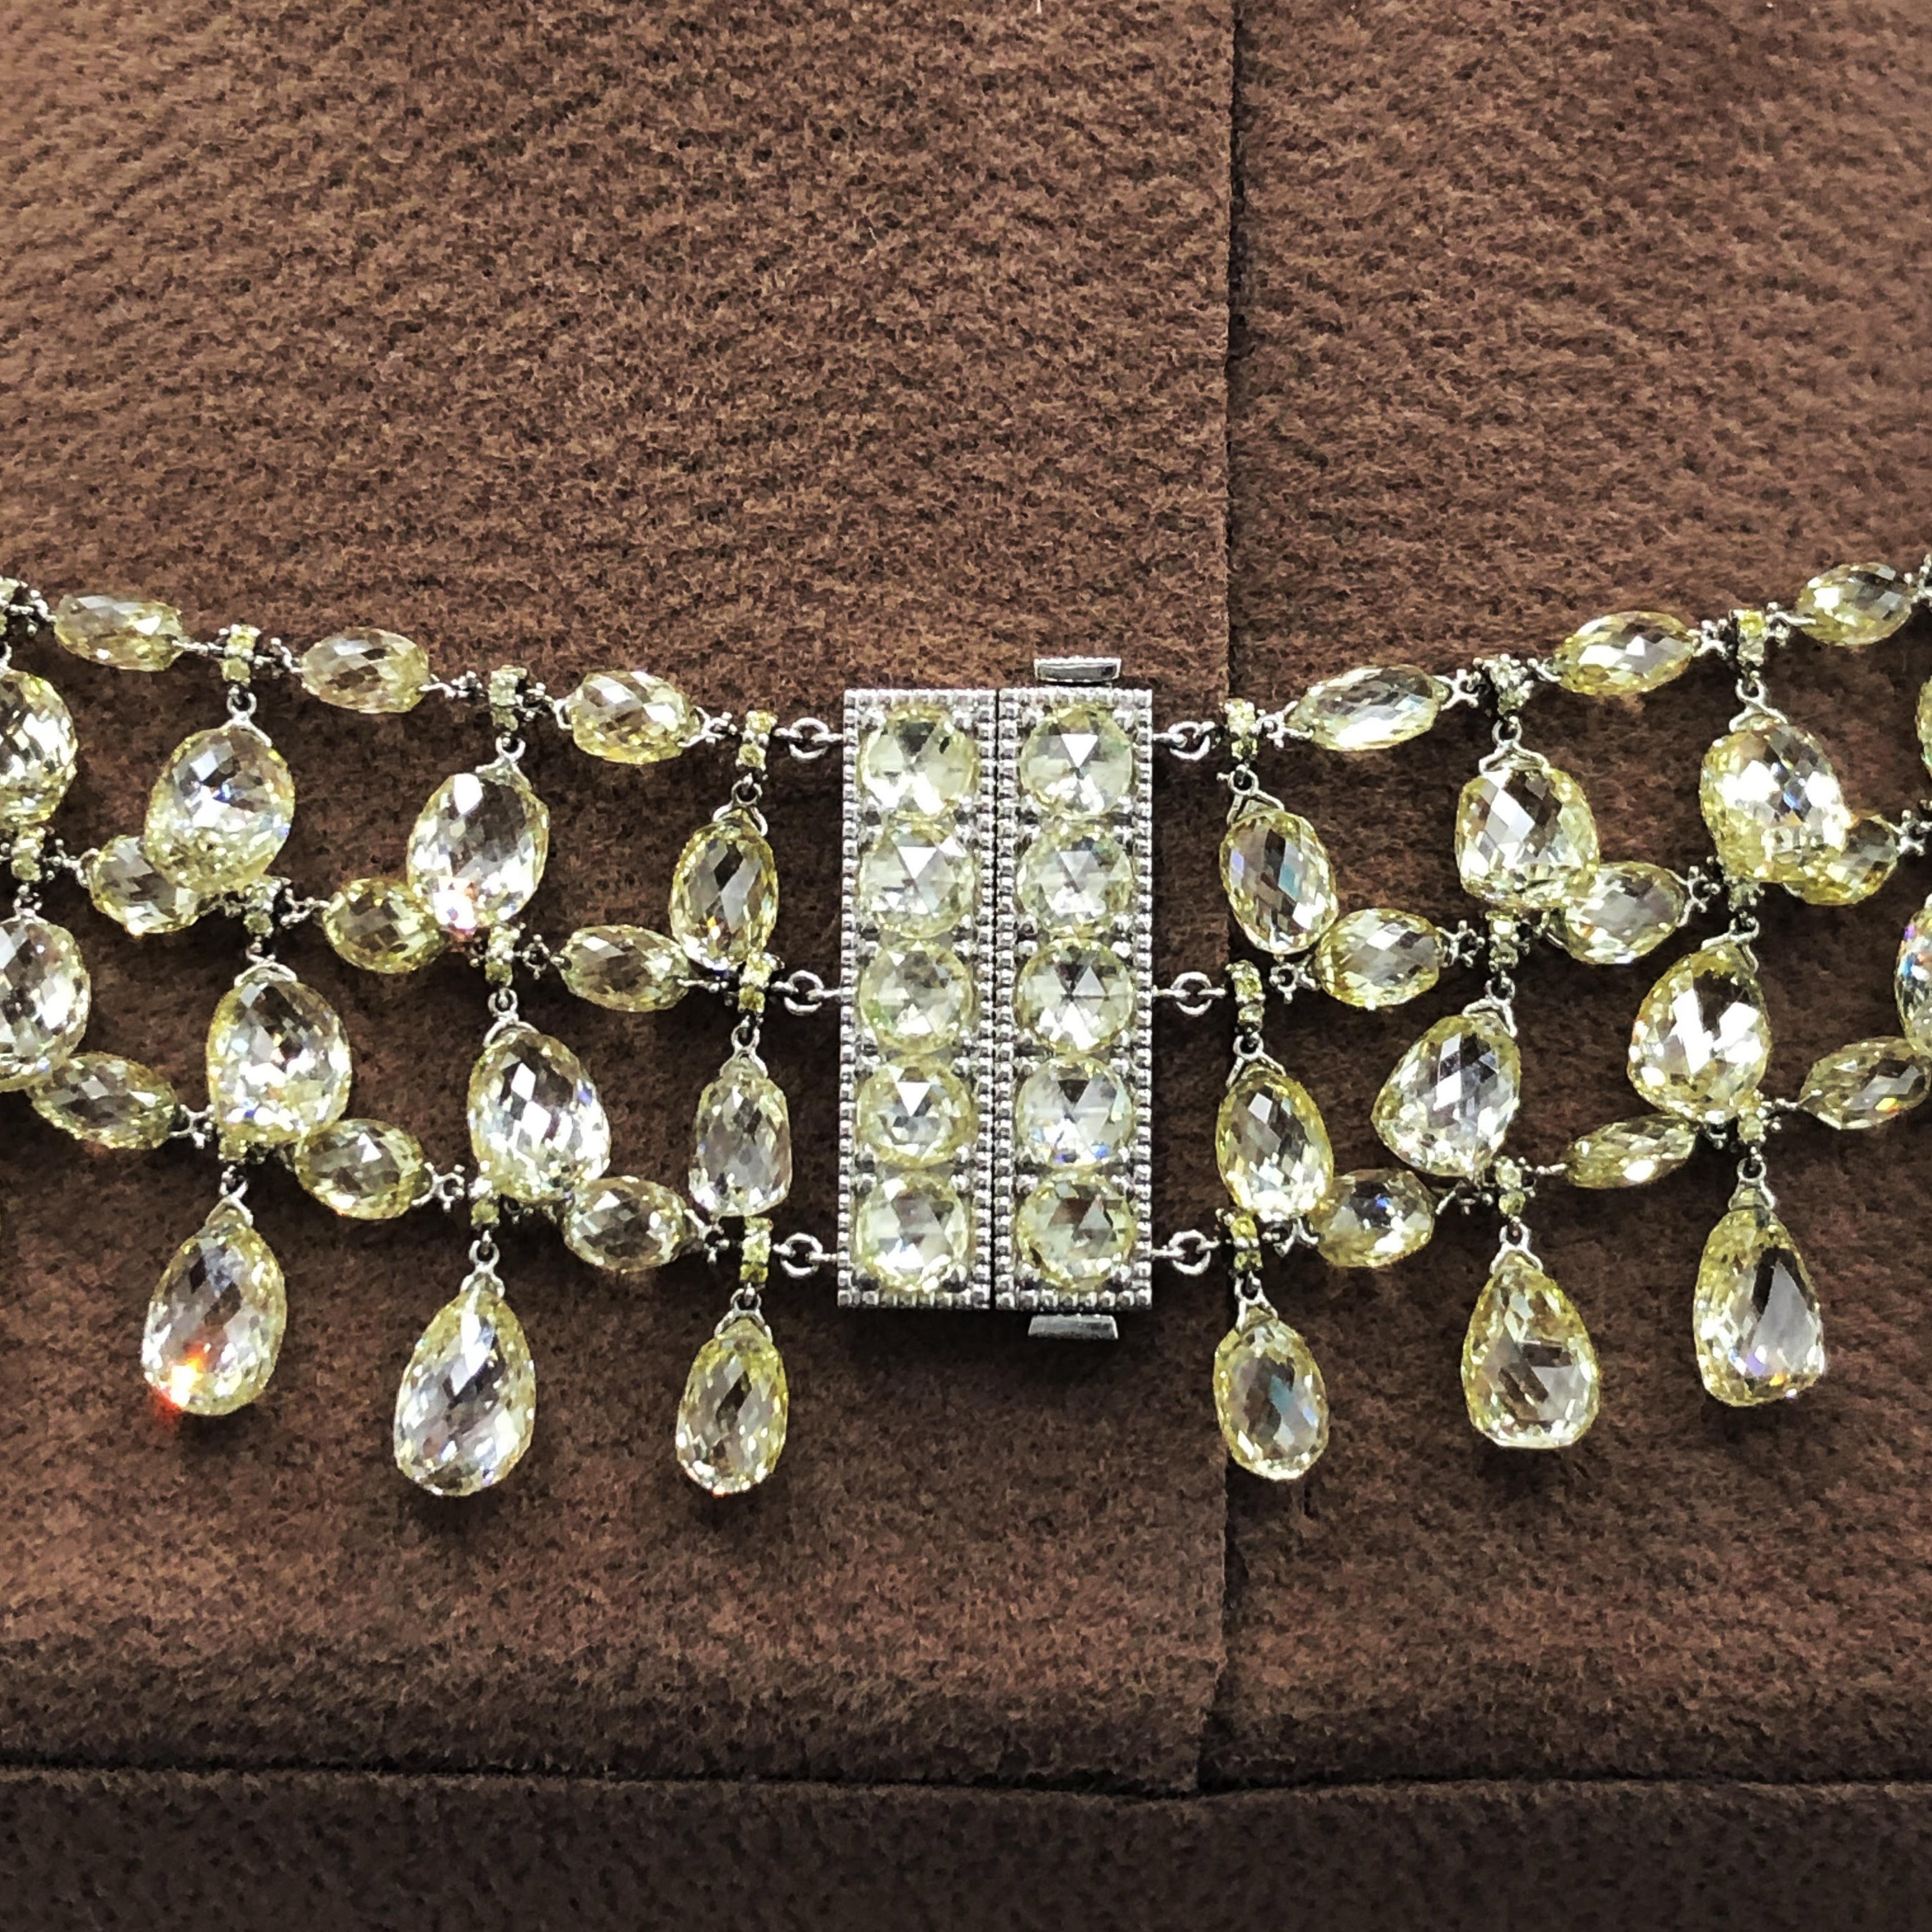 This Necklace Features In House Developed Single and Double Drilled Total 297 Pieces Natural Yellowish Color Briolettes Weighing 220.46 Carats Set With 4.65 Carats Rosecut Diamonds Beautifully Hand Crafted in 62.42 Grams 18 Karat Gold. 
This